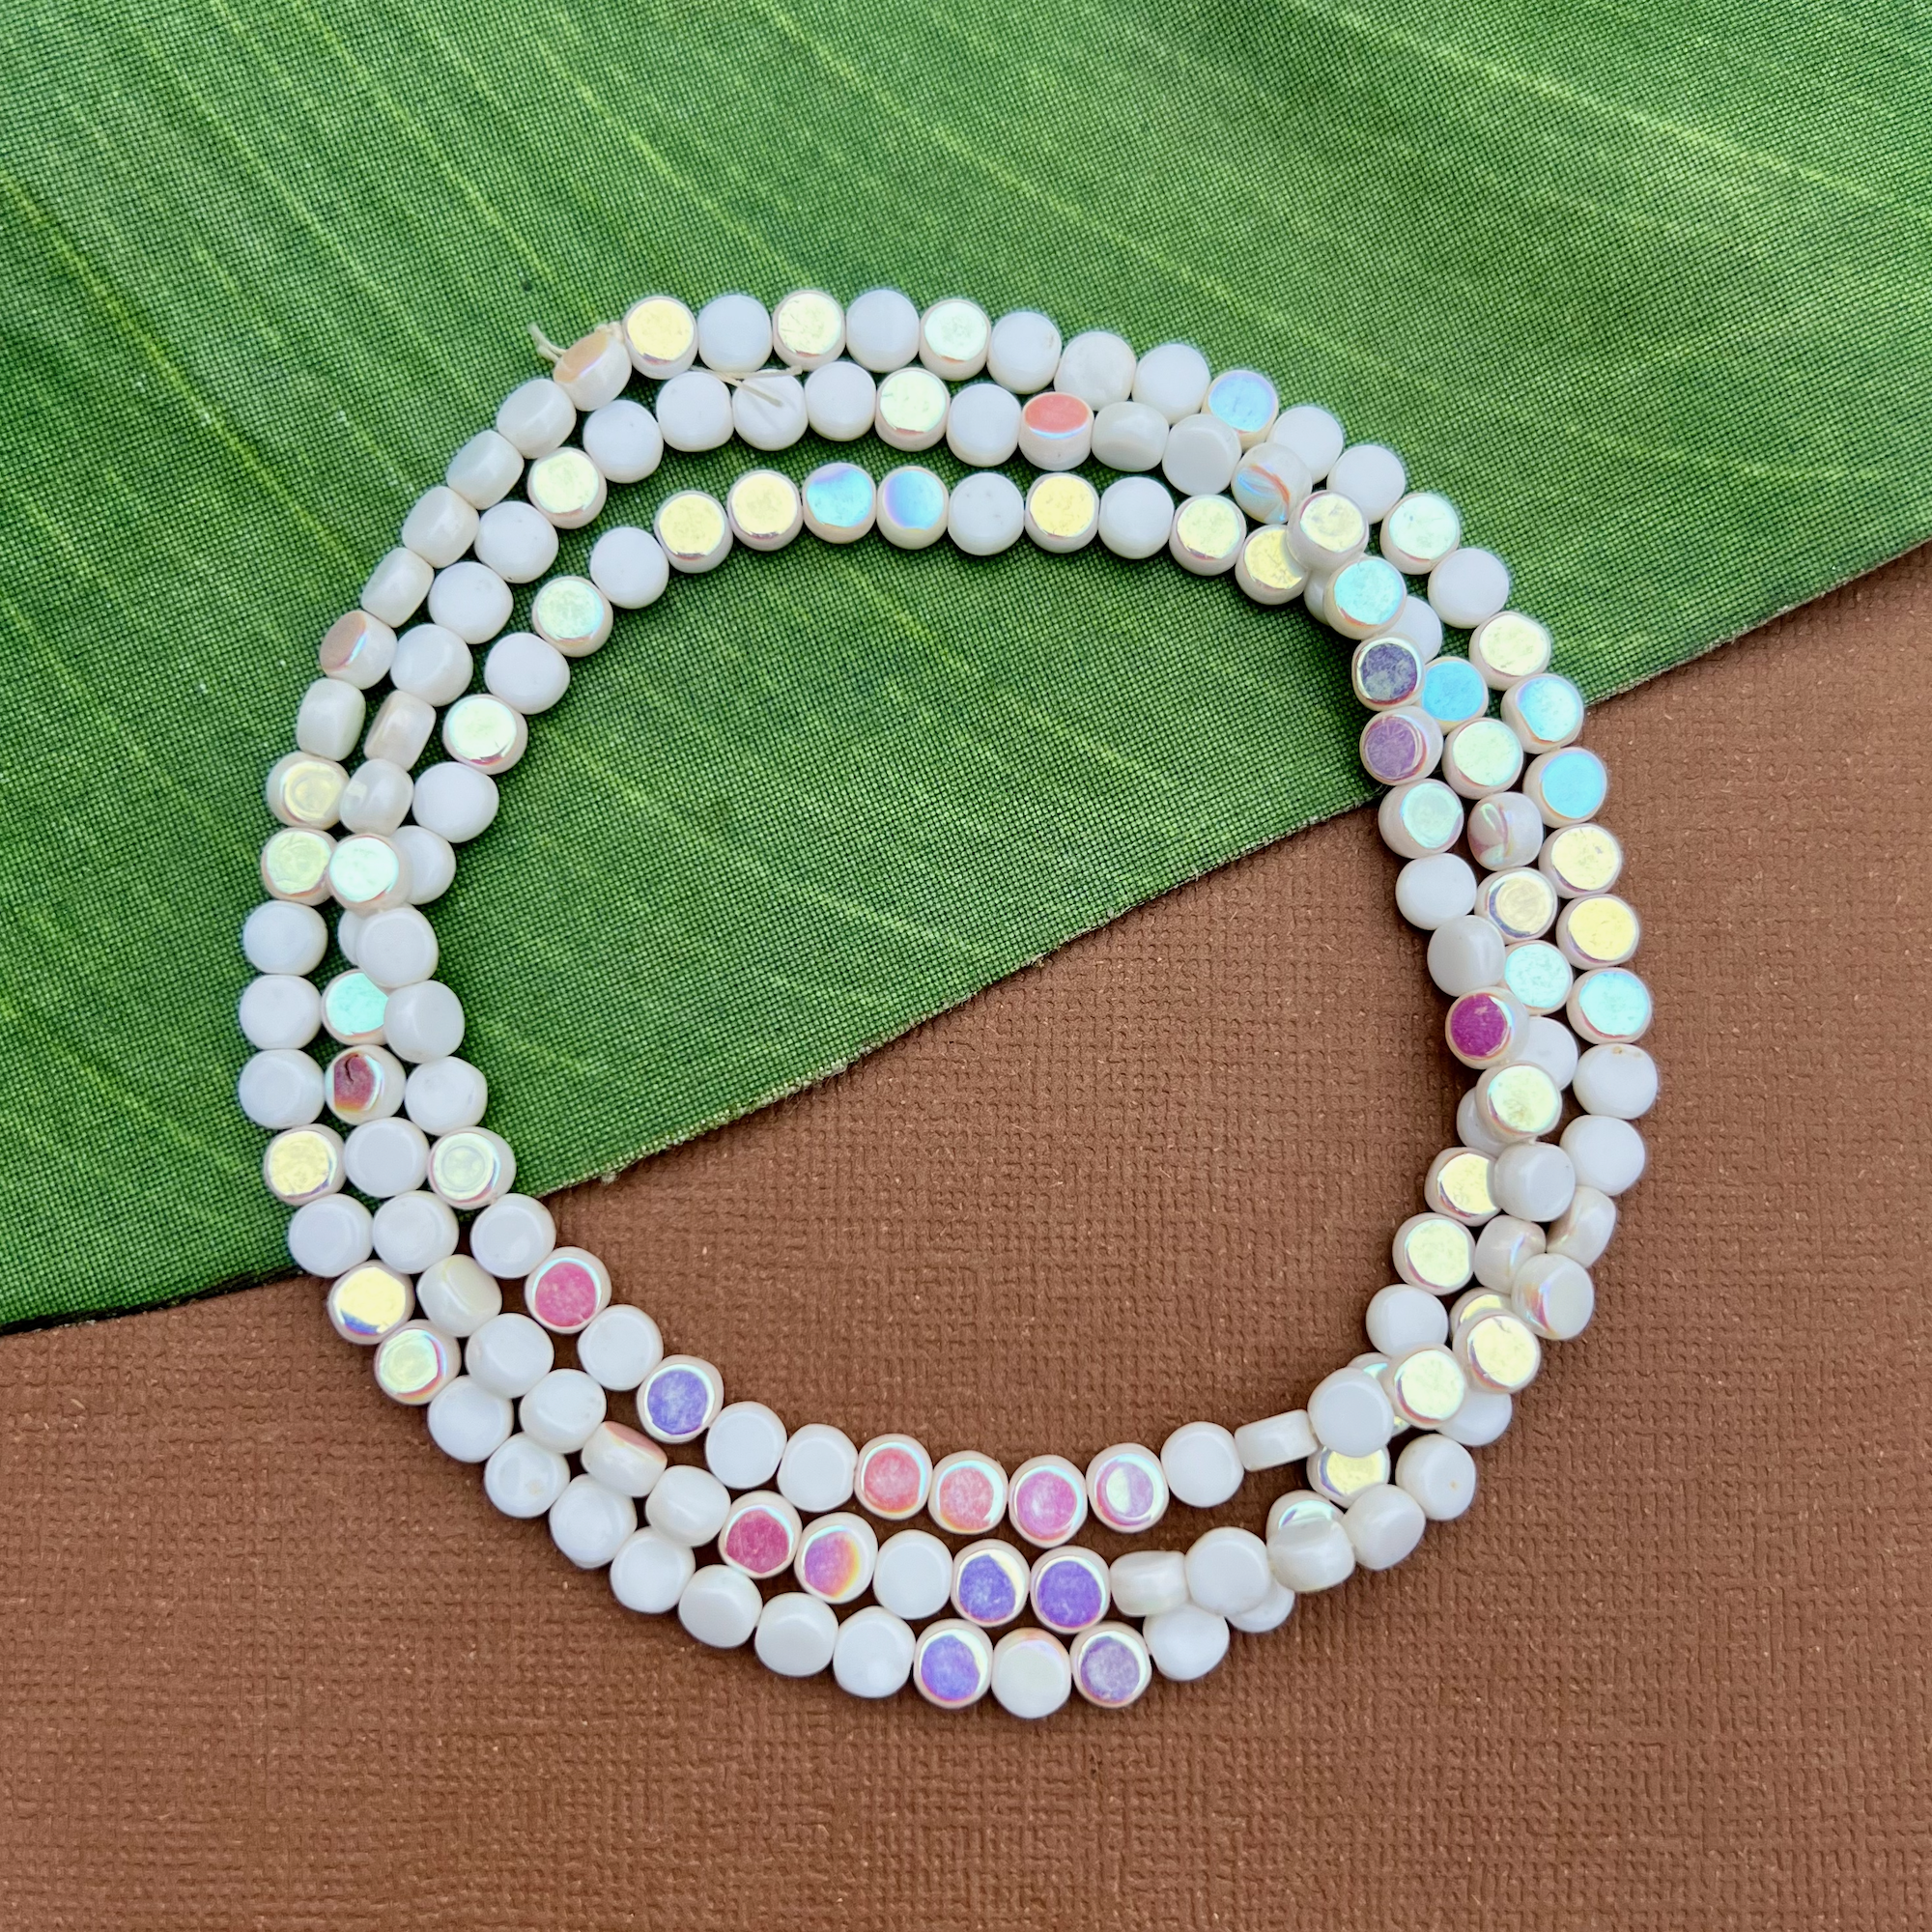 White AB Pill Beads - 150 Pieces